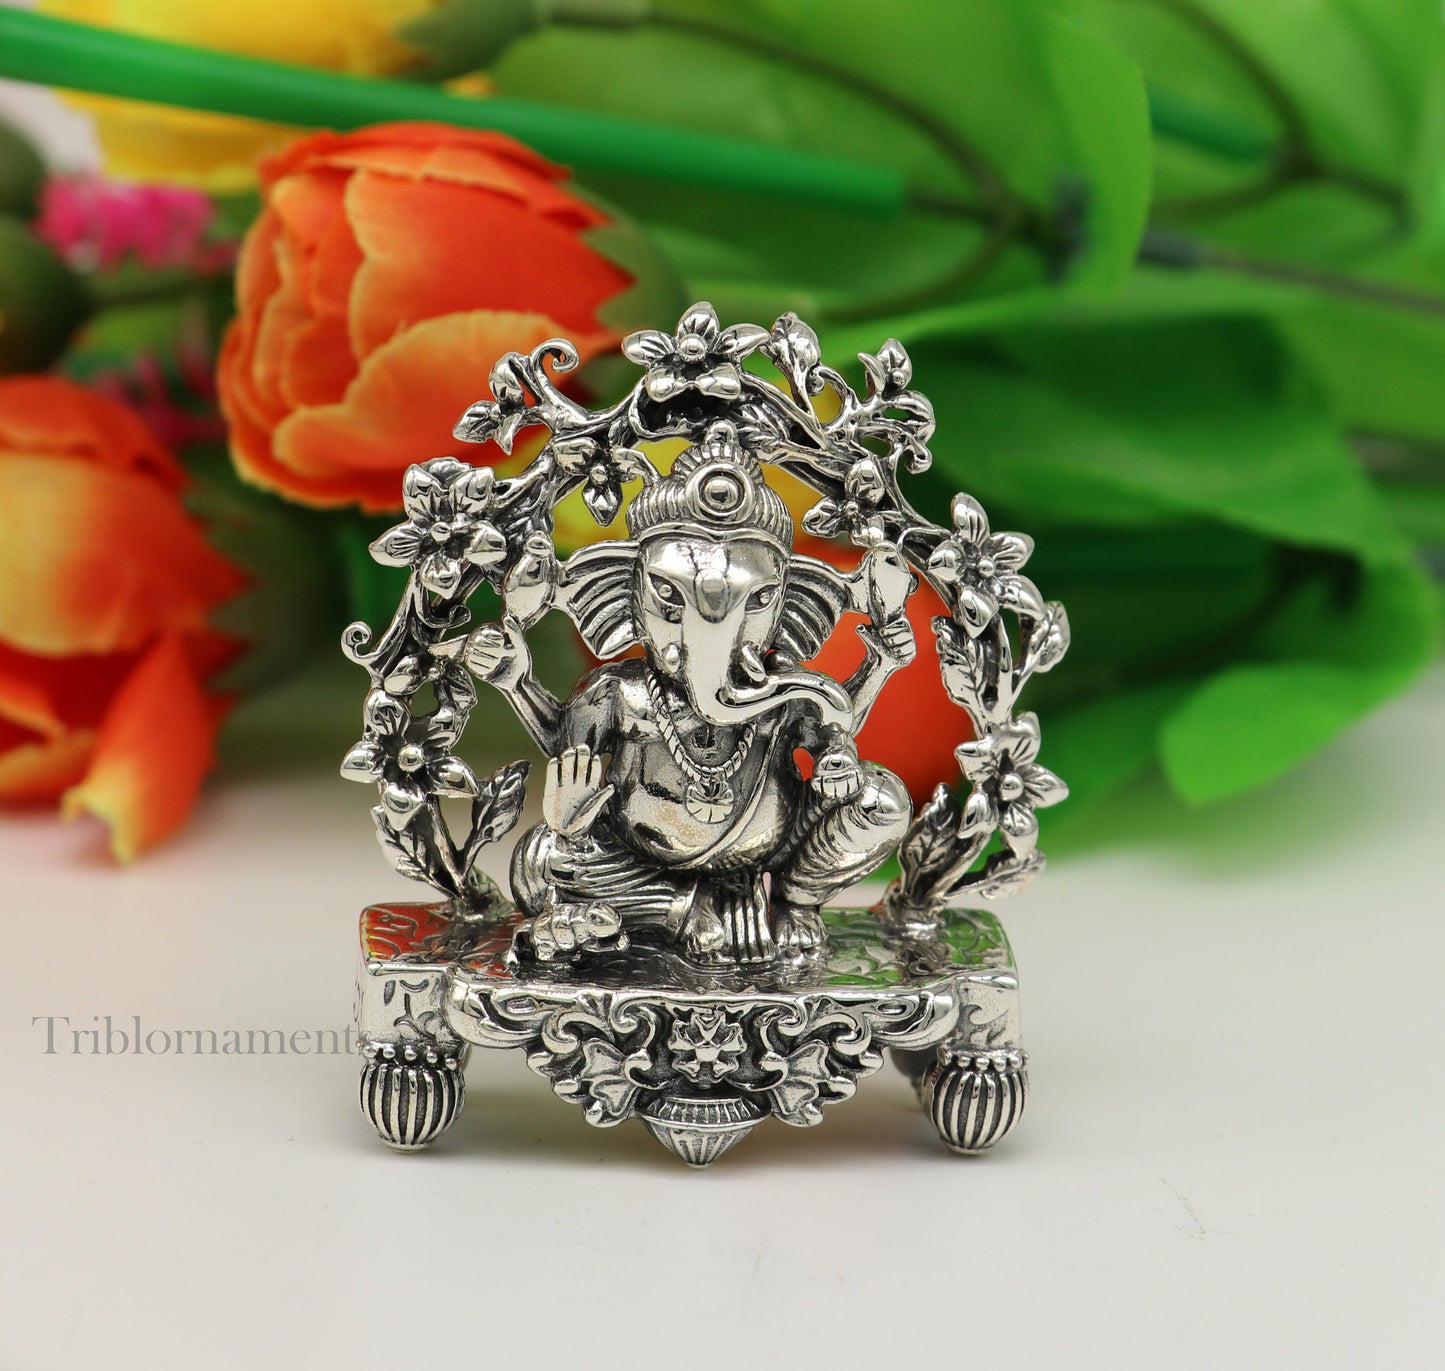 925 Sterling silver Lord Ganesh Idol, Pooja Articles, Indian Silver Idols, handcrafted Lord Ganesh statue sculpture amazing gifting art175 - TRIBAL ORNAMENTS